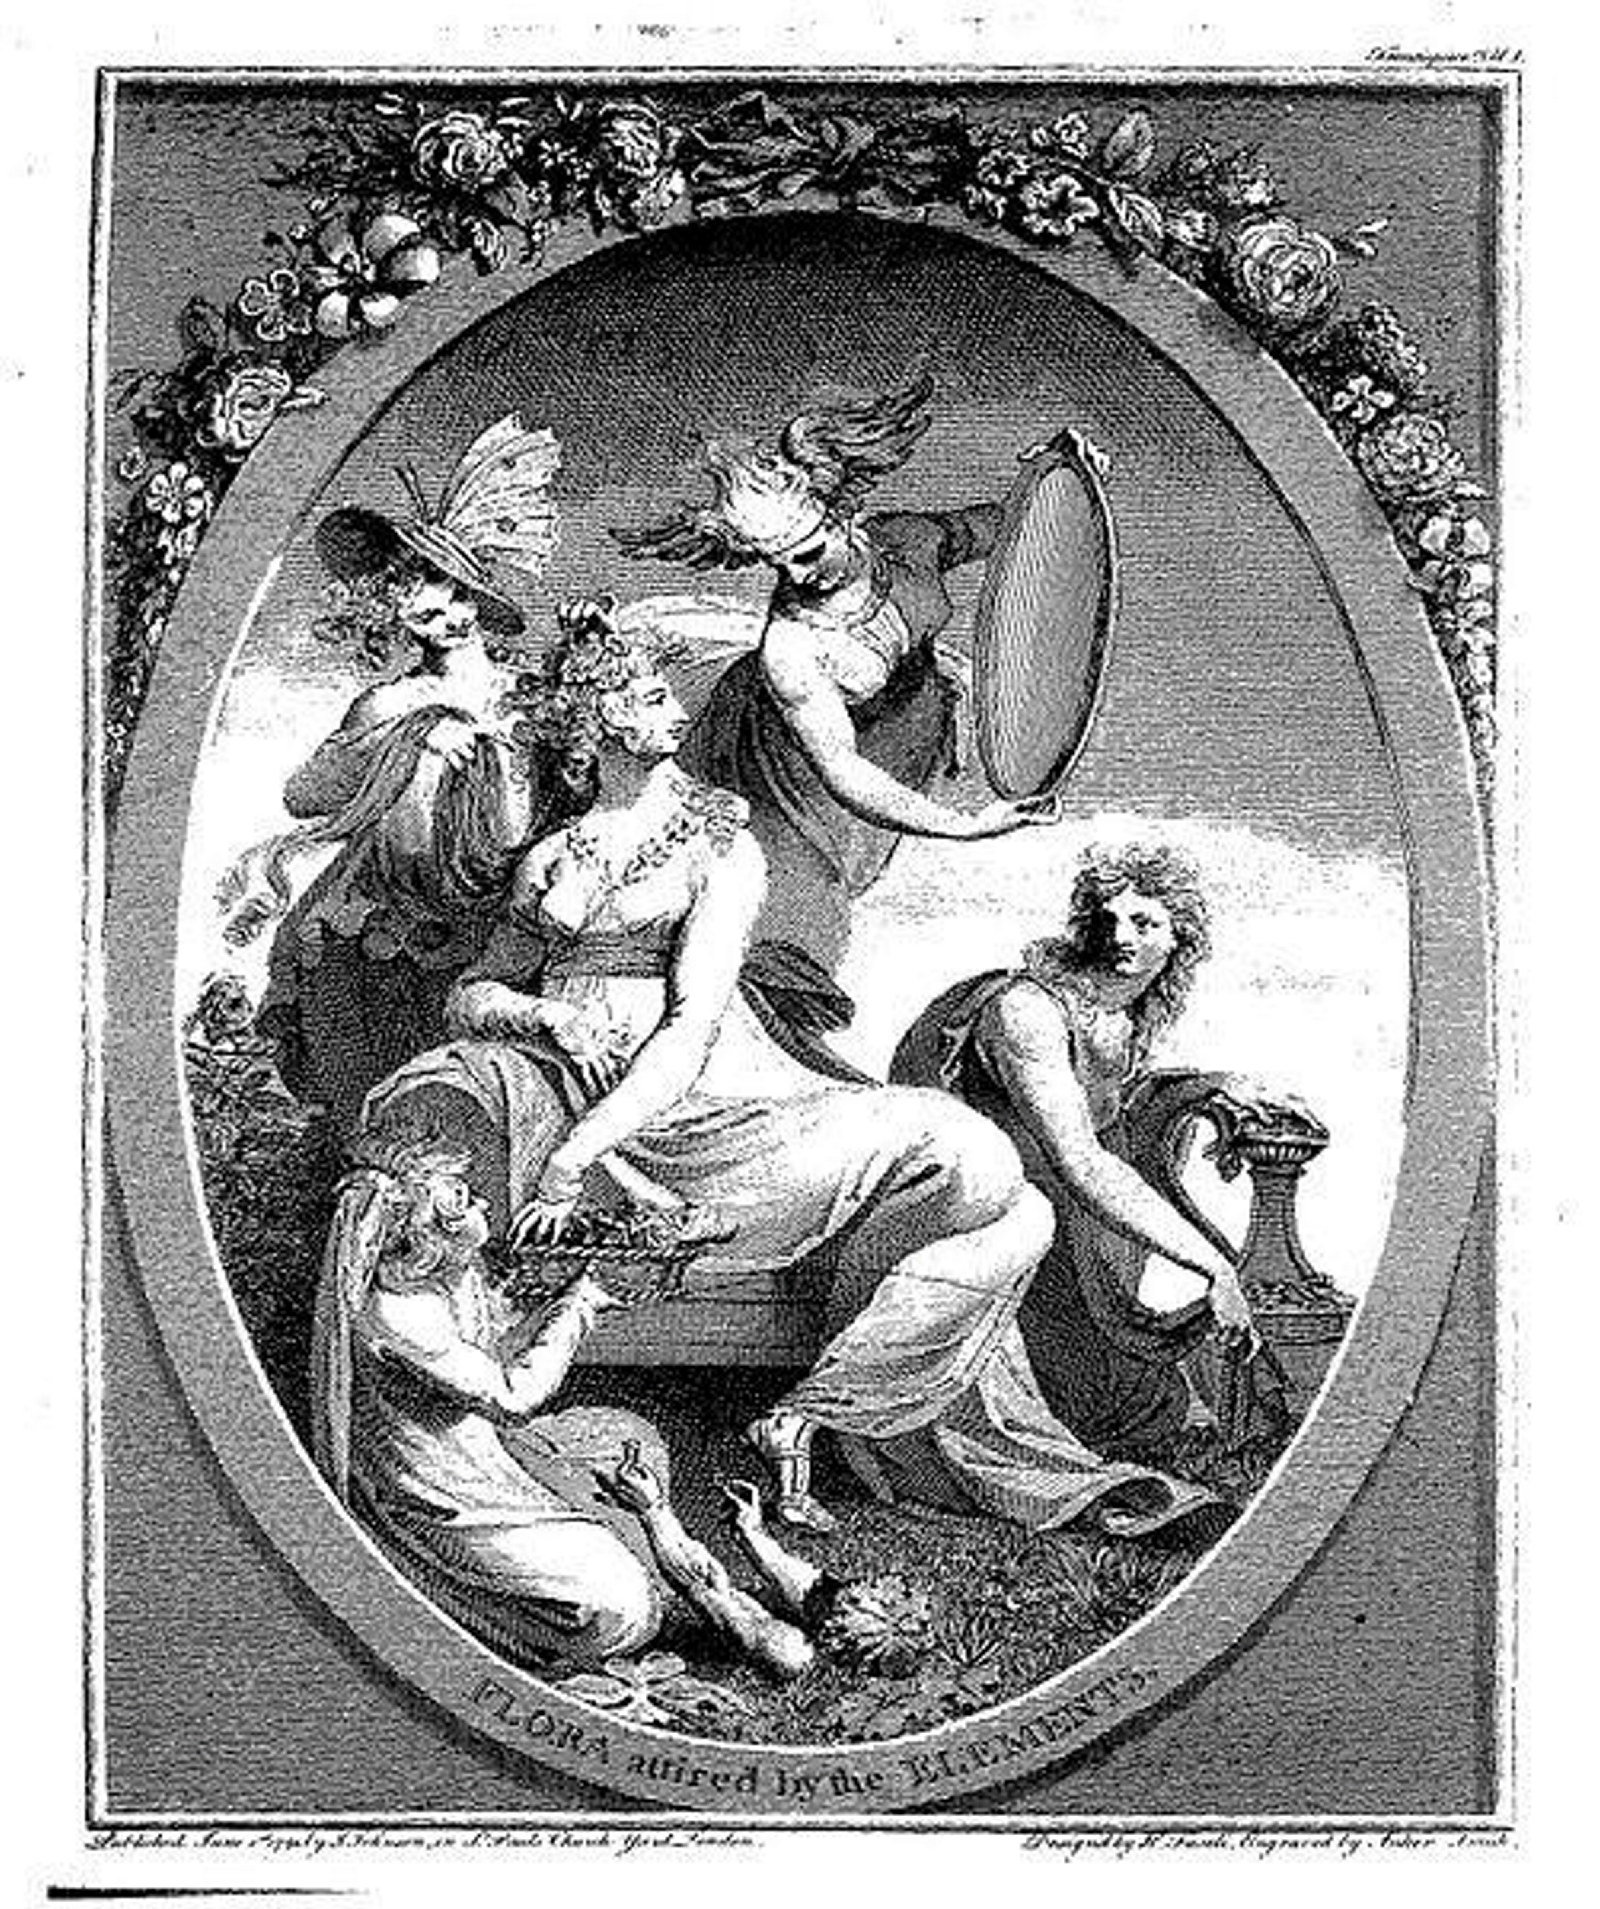 black and white photographic reproduction of an engraving showing women and flora